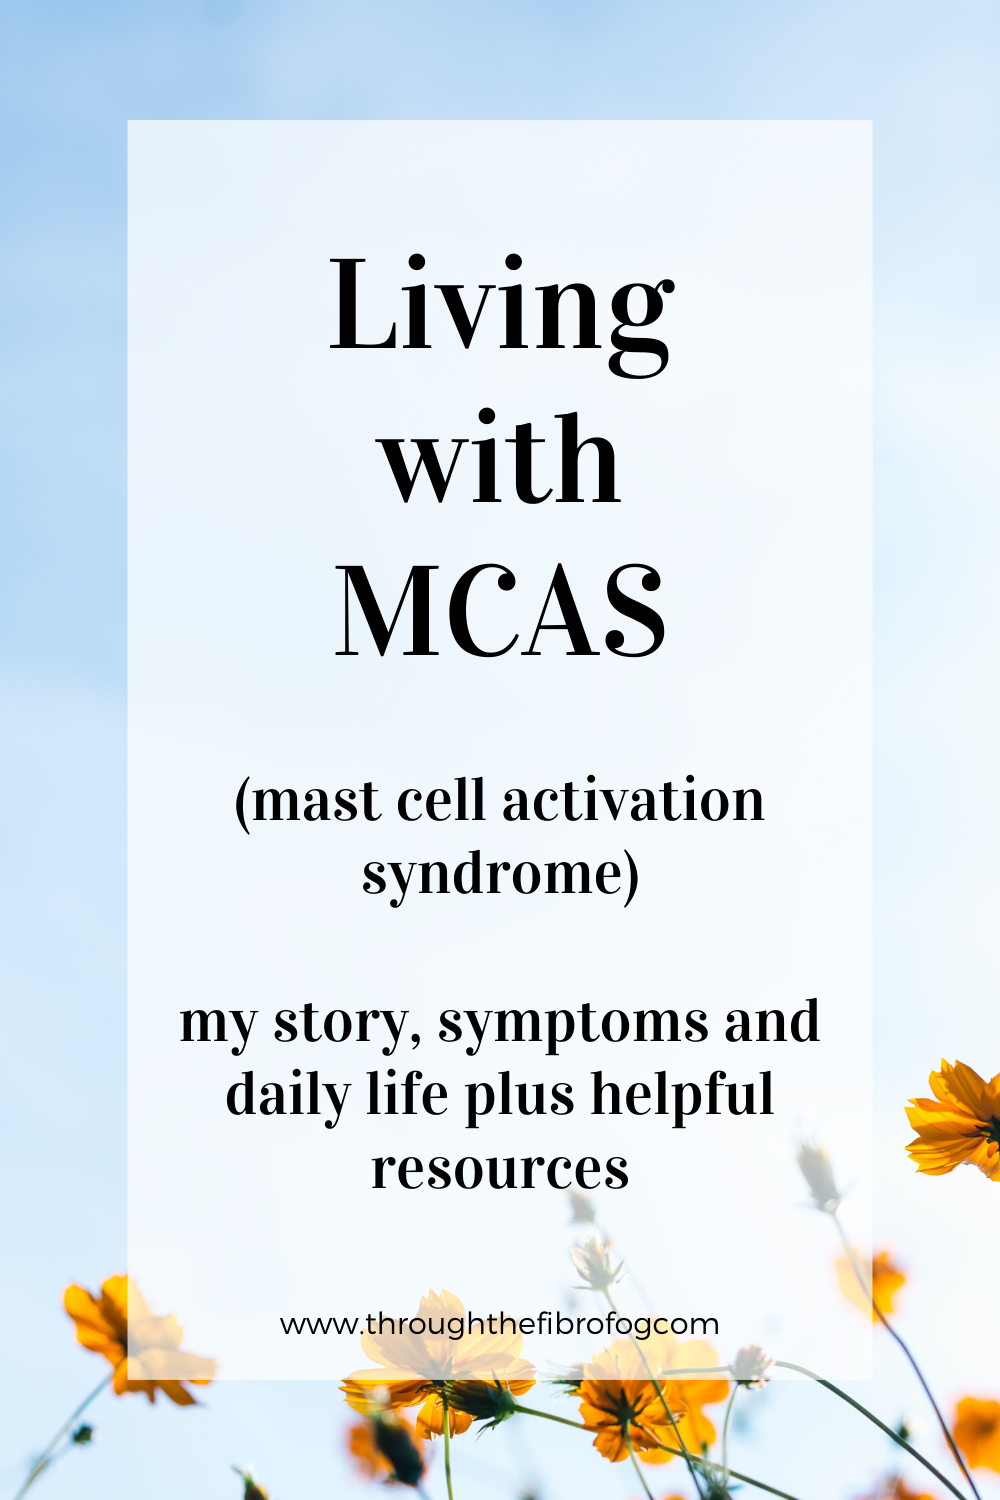 Living with MCAS - mast cell activation syndrome as a chronic illness condition.